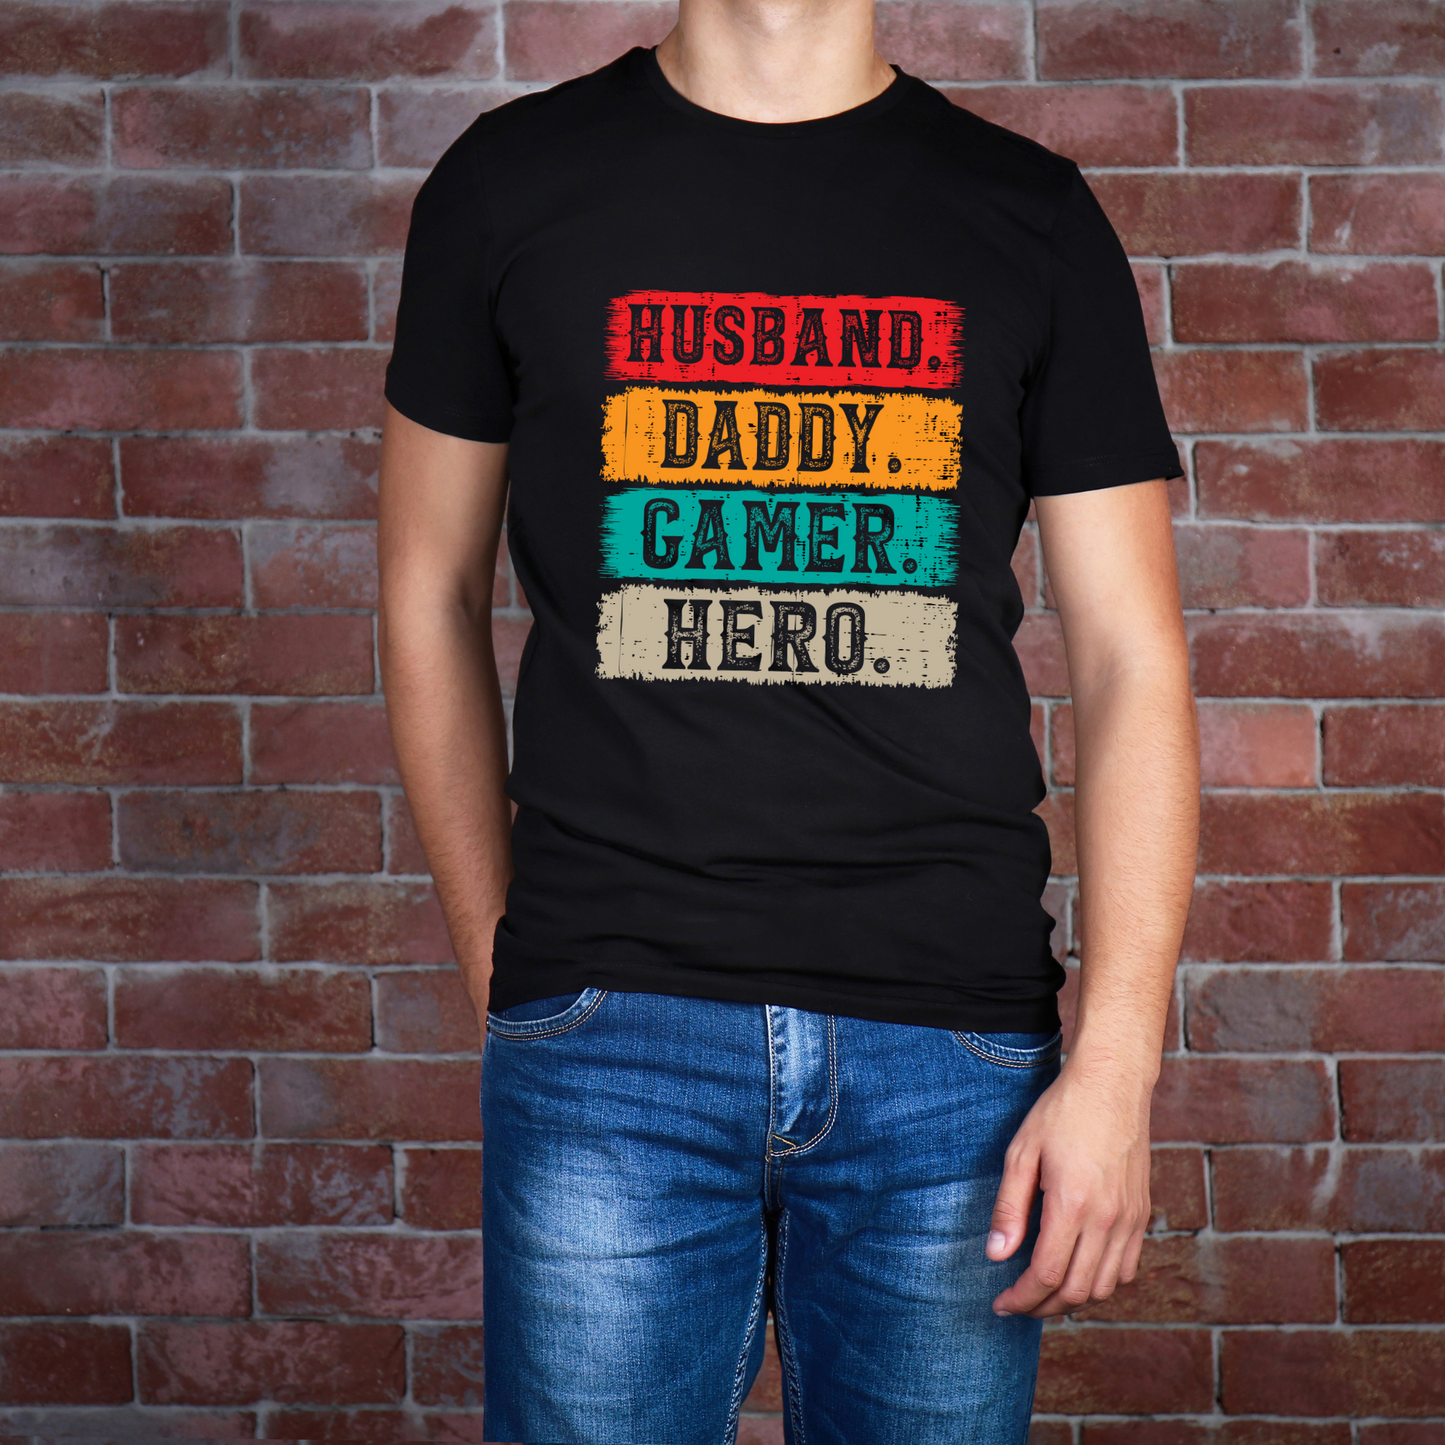 Husband, Daddy, Gamer, Hero: The Ultimate Dad T Shirt